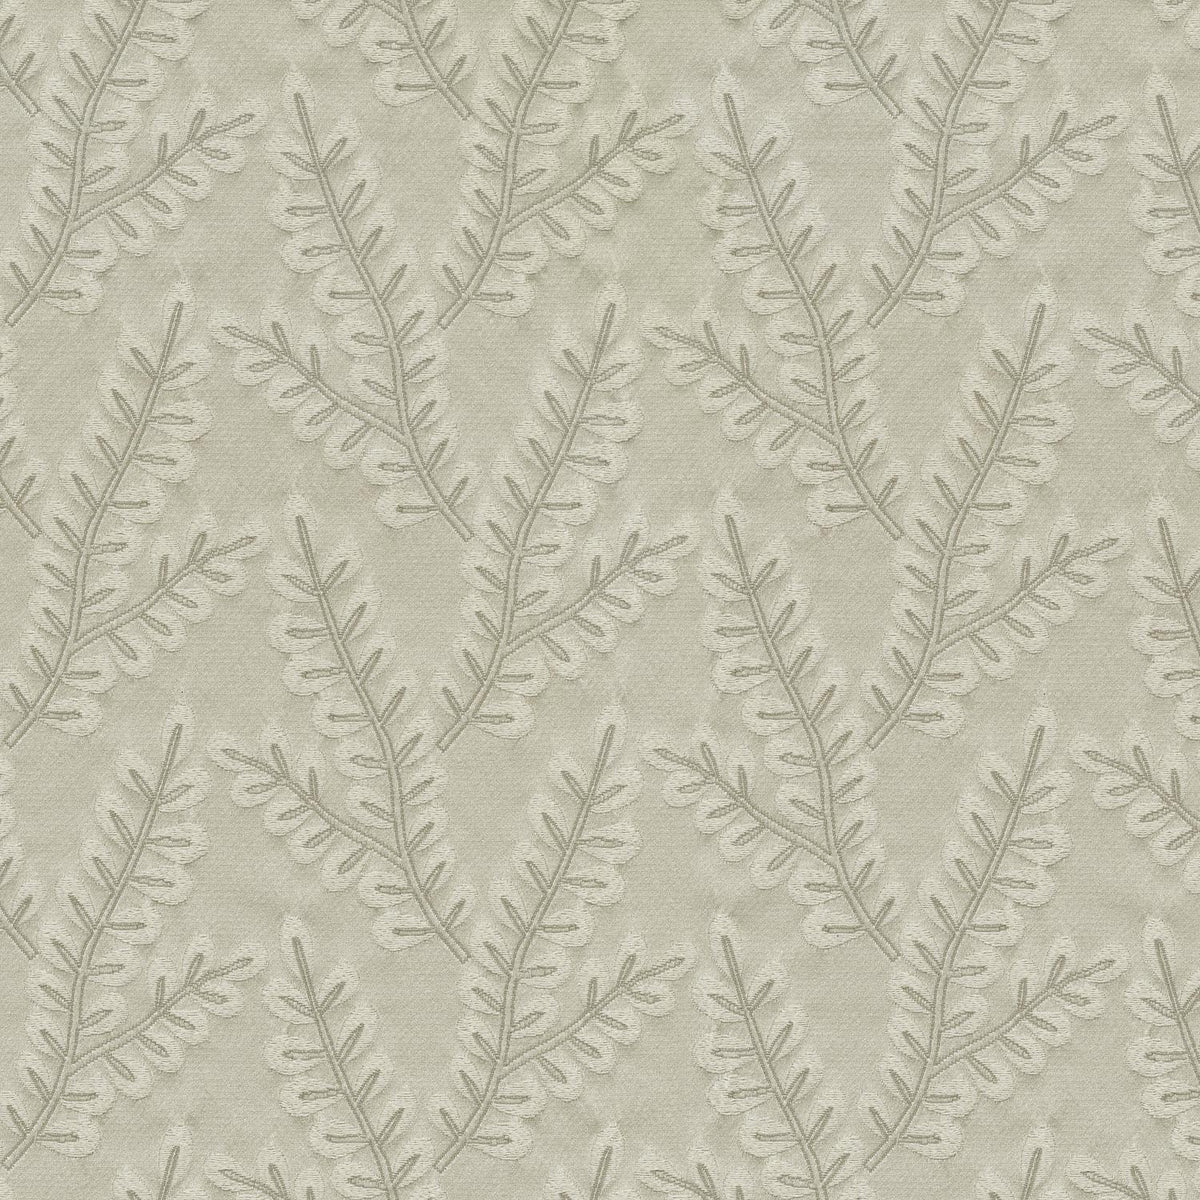 P/K Lifestyles Delphine - Pearl 410030 Fabric Swatch